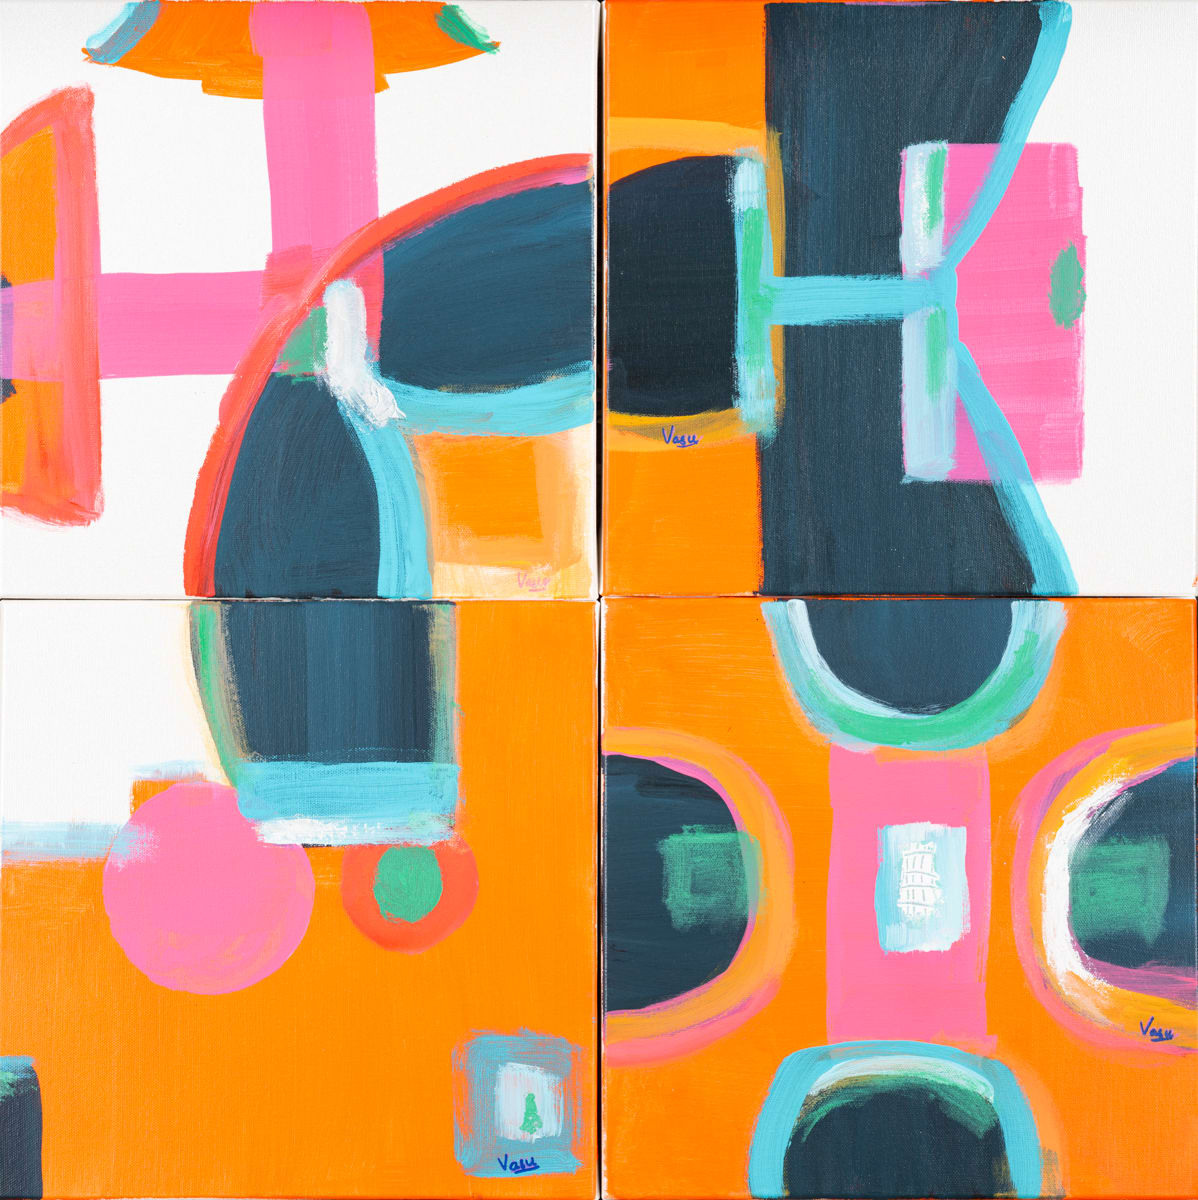 Kaleidoscope series 1-4 by Vasu Tolia  Image: These four paintings are part of a series of  4 small 12x12" abstract works which can be together or individually  to brighten up any wall. They are characterized by bold colors, abstract shapes, and expressive brushwork. They showcase a vibrant, dynamic style with elements that seem to flow and intersect across the canvases.